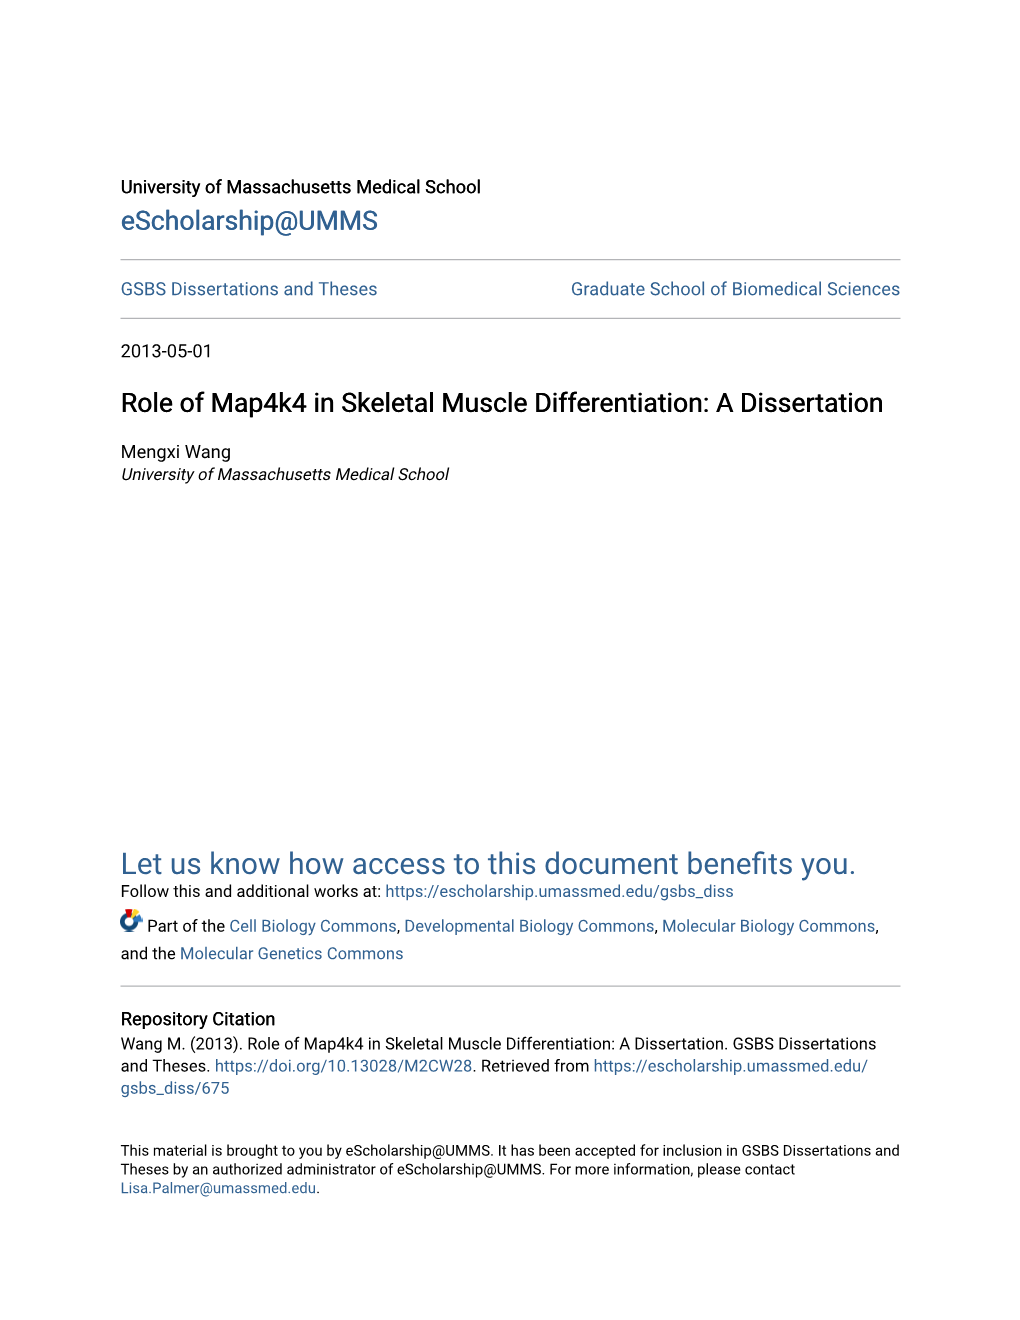 Role of Map4k4 in Skeletal Muscle Differentiation: a Dissertation